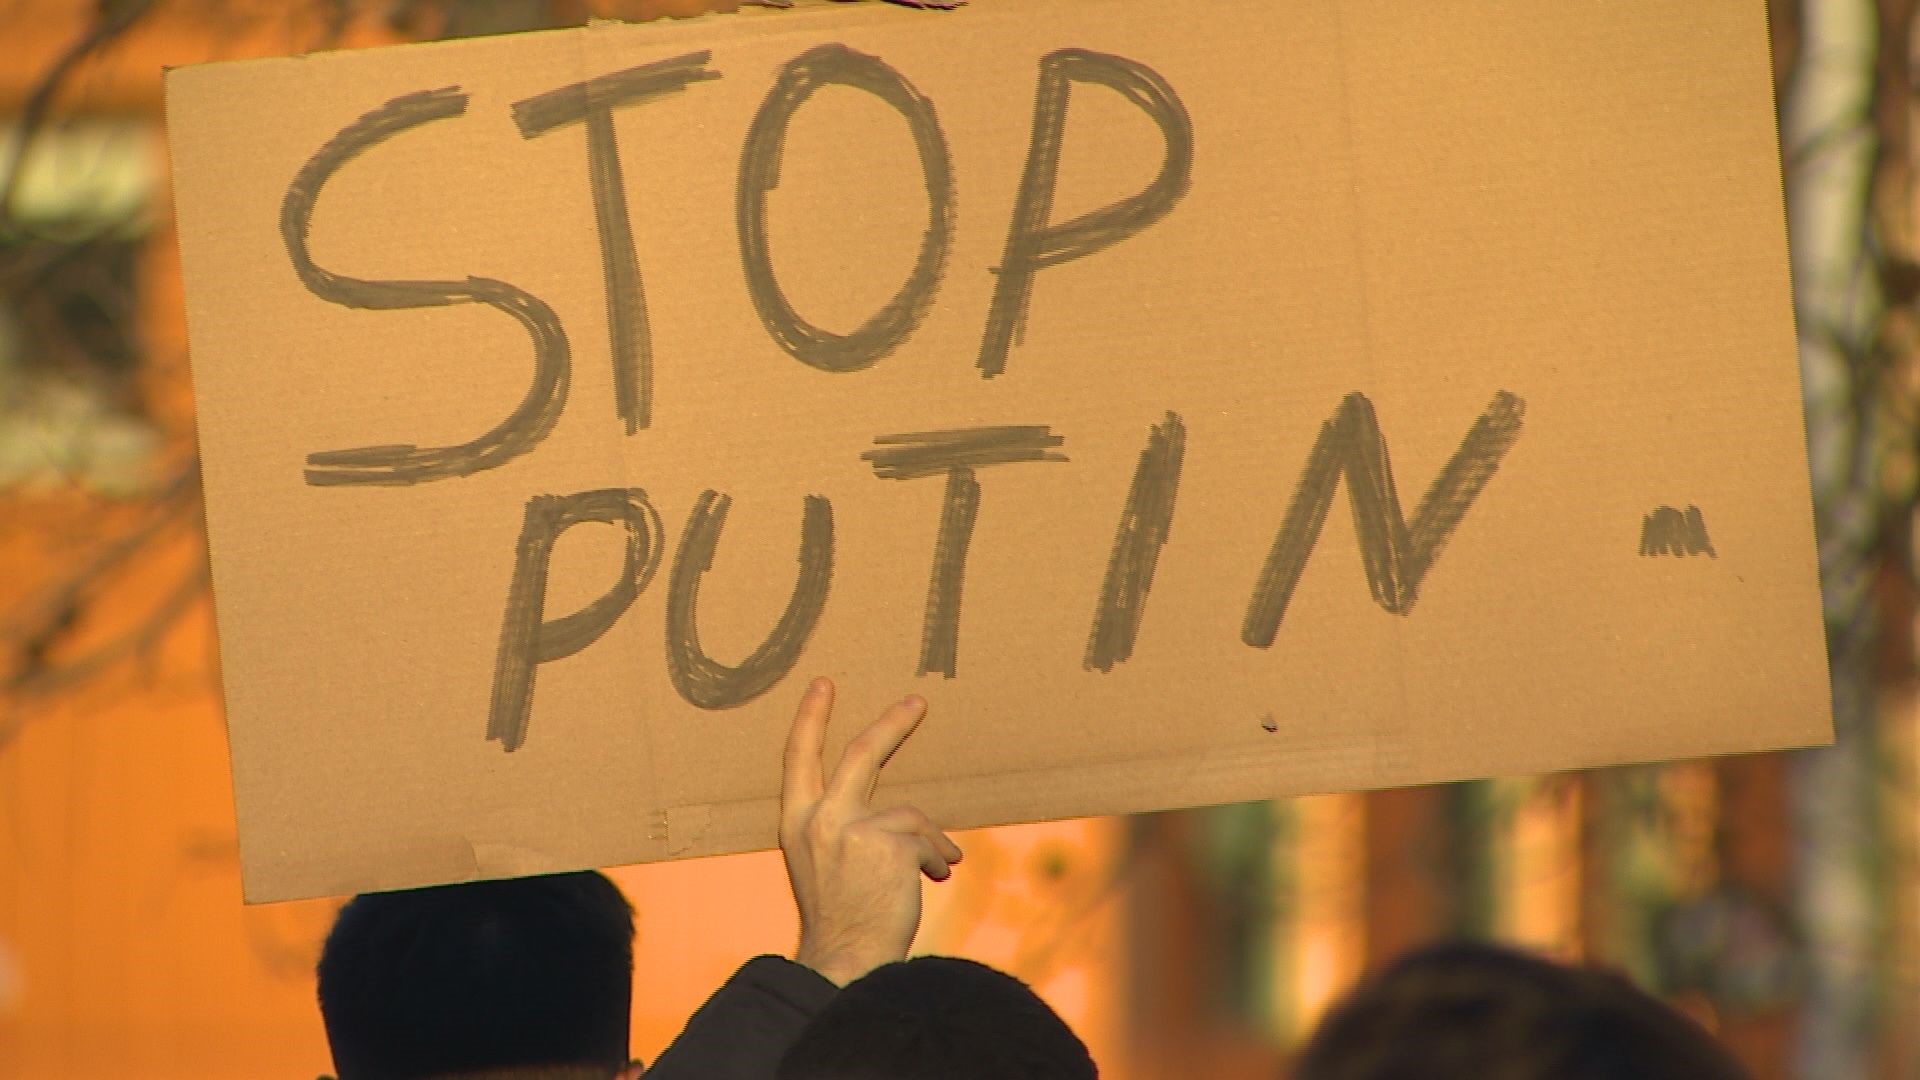 “What Putin has initiated yesterday is an atrocity it’s a war crime. He literally has started a war without any provocation,” said Russian-born protester Mitch Gaul.